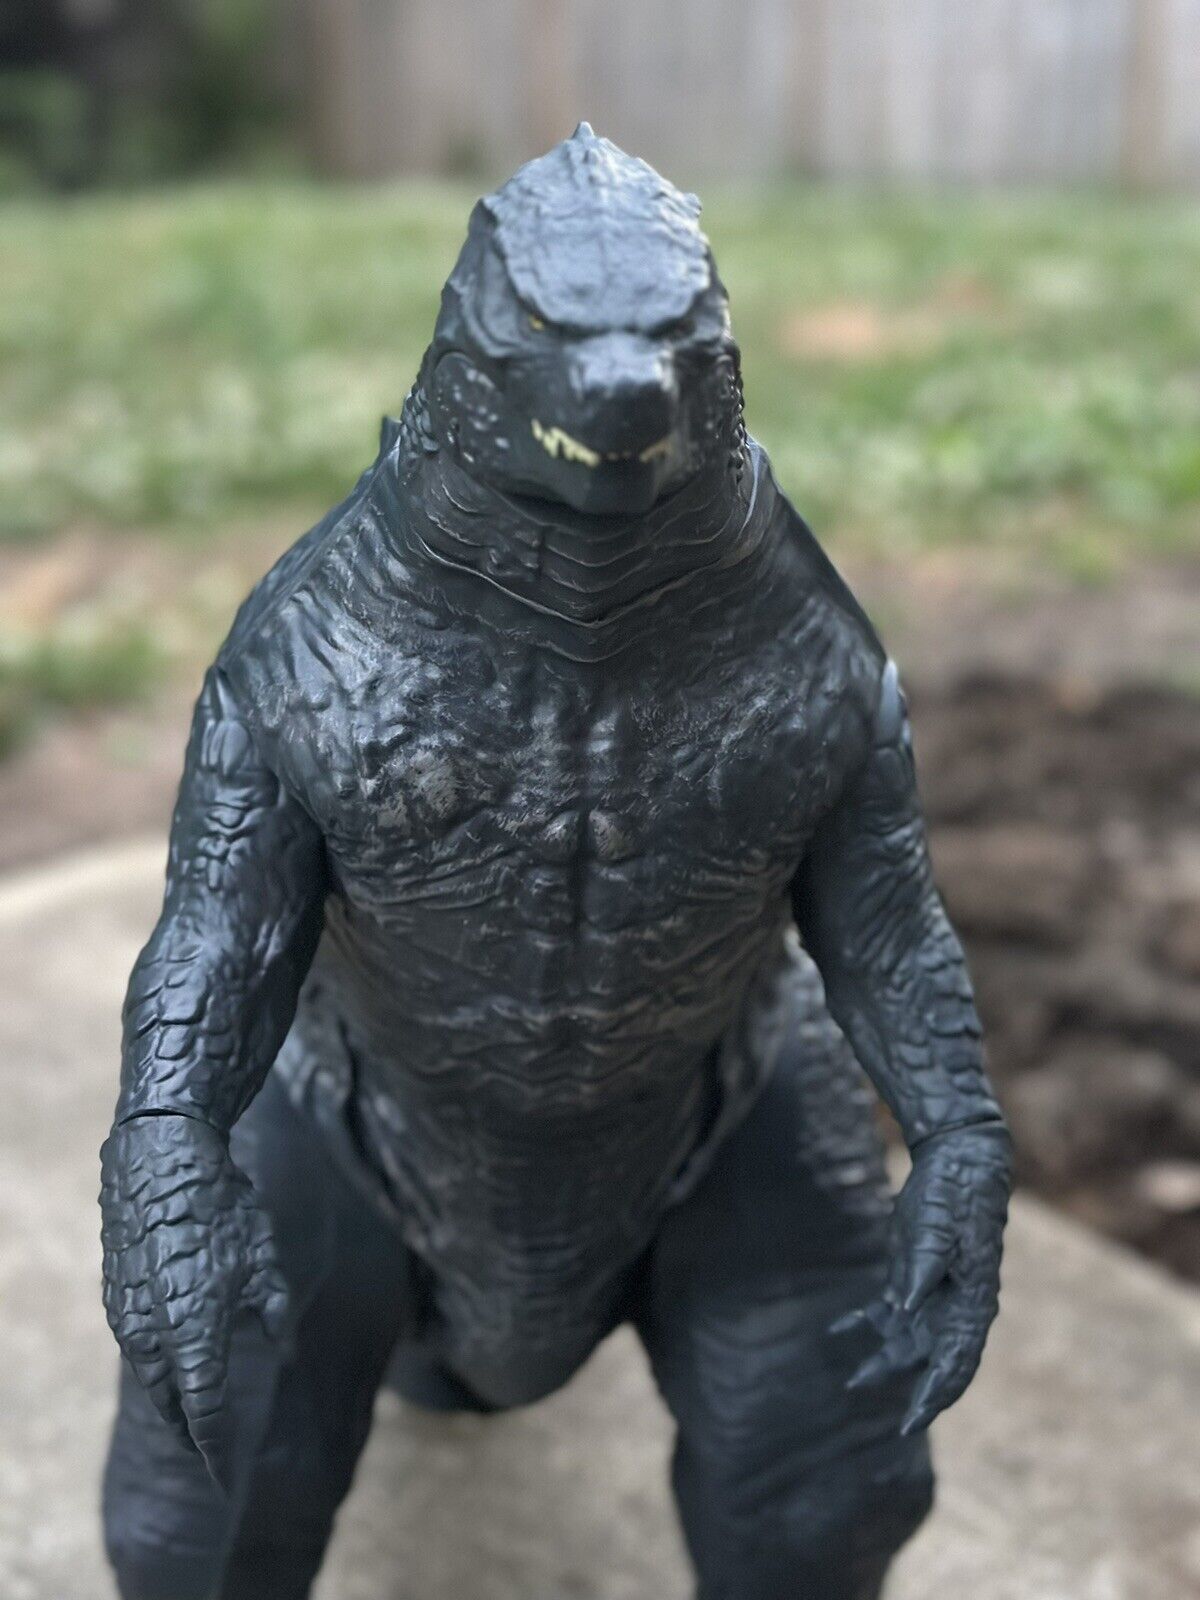 Jakks Large 40" Inch Godzilla King of The Monsters 2019 Articulated Figure Giant